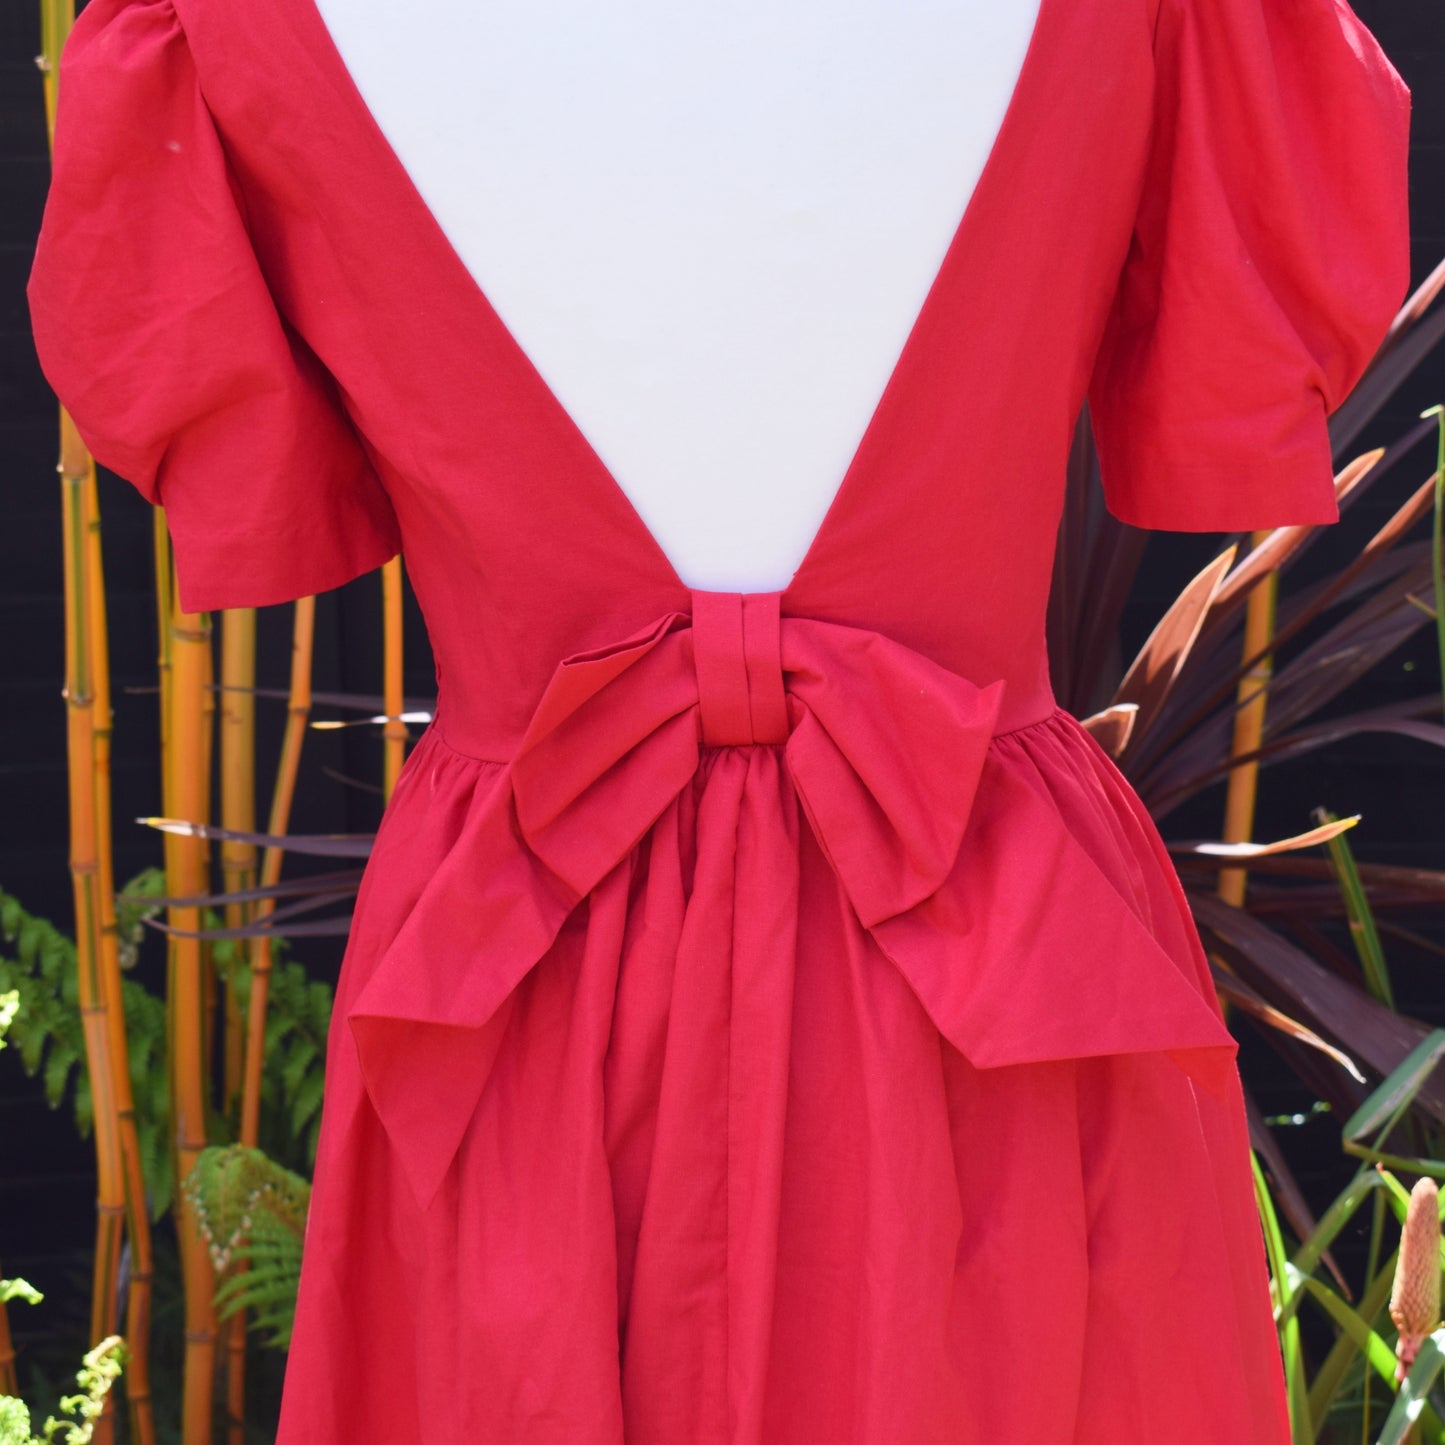 Vintage 1980s Laura Ashley Dress - Red - Size 12